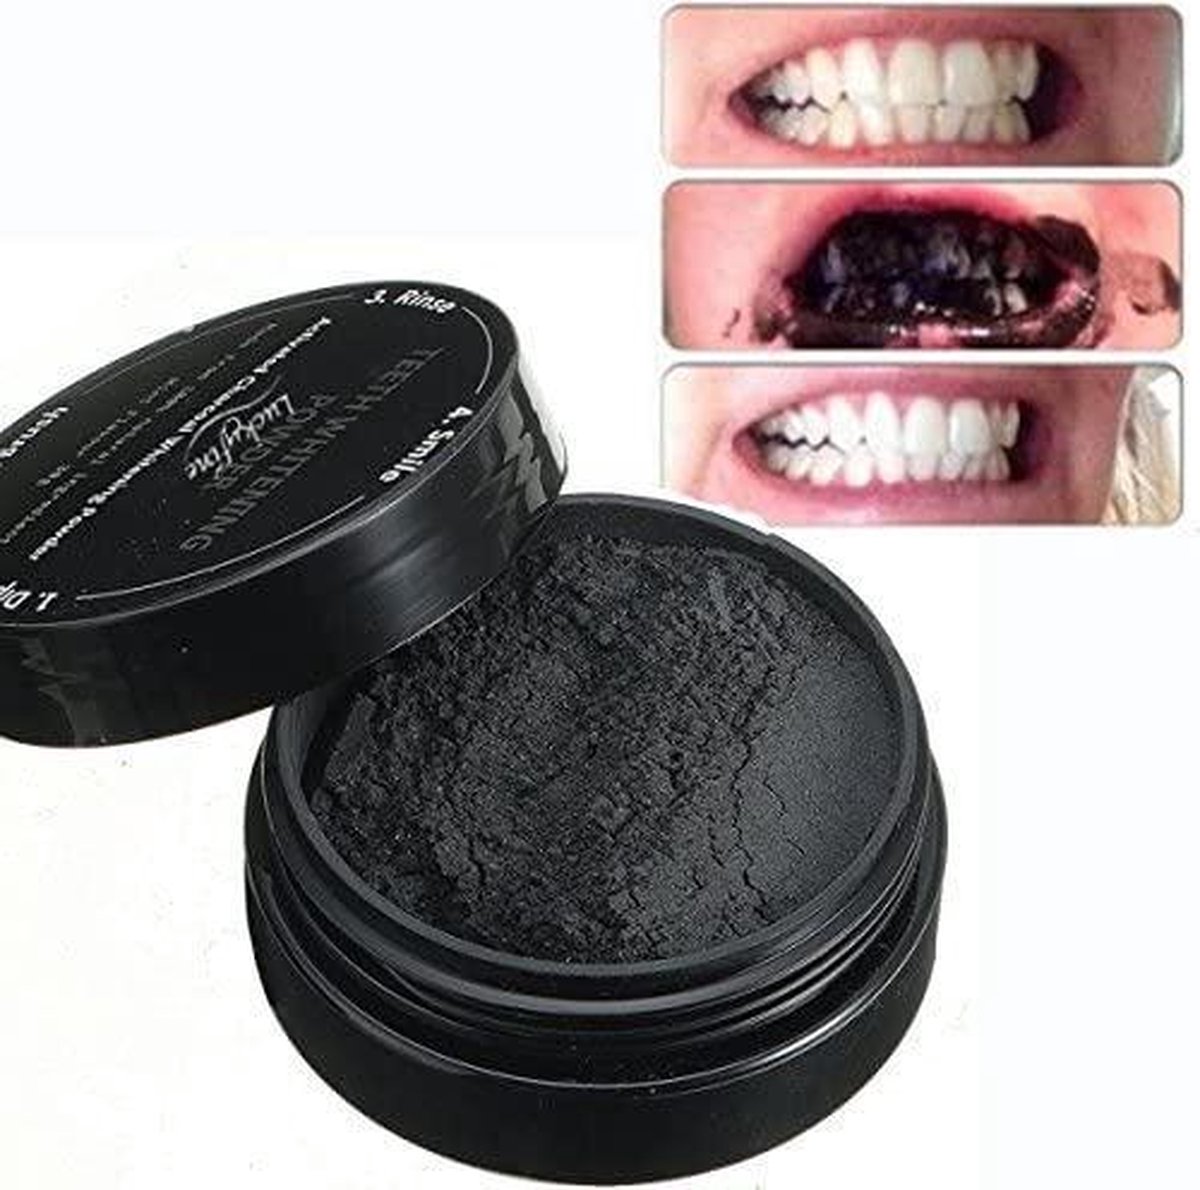 Activated charcoal teeth